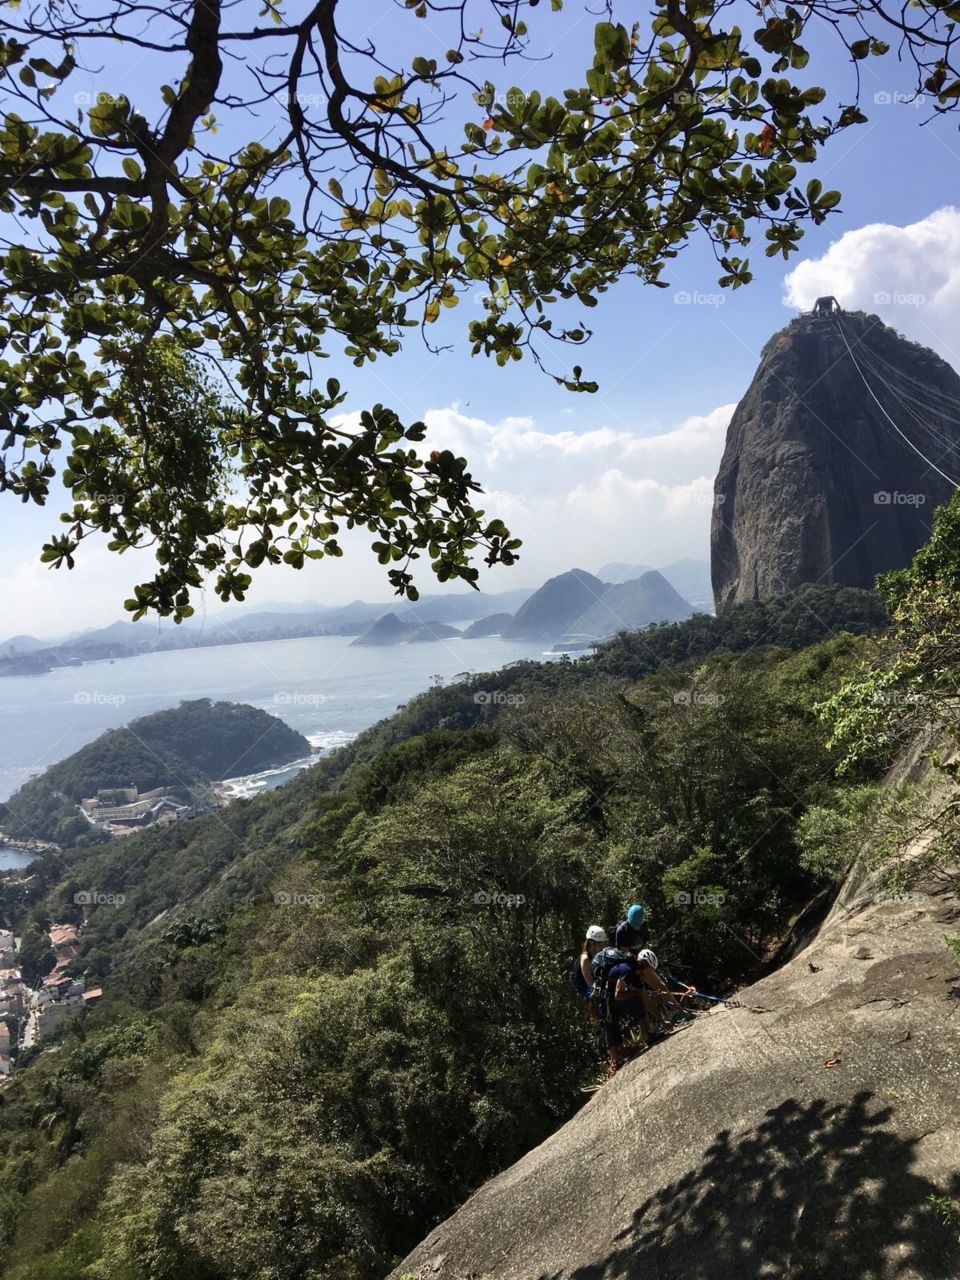 View of Rio de Janeiro. From above you can see the sea, the mountains, the sugar loaf and adventurers enjoying the day doing rappel.